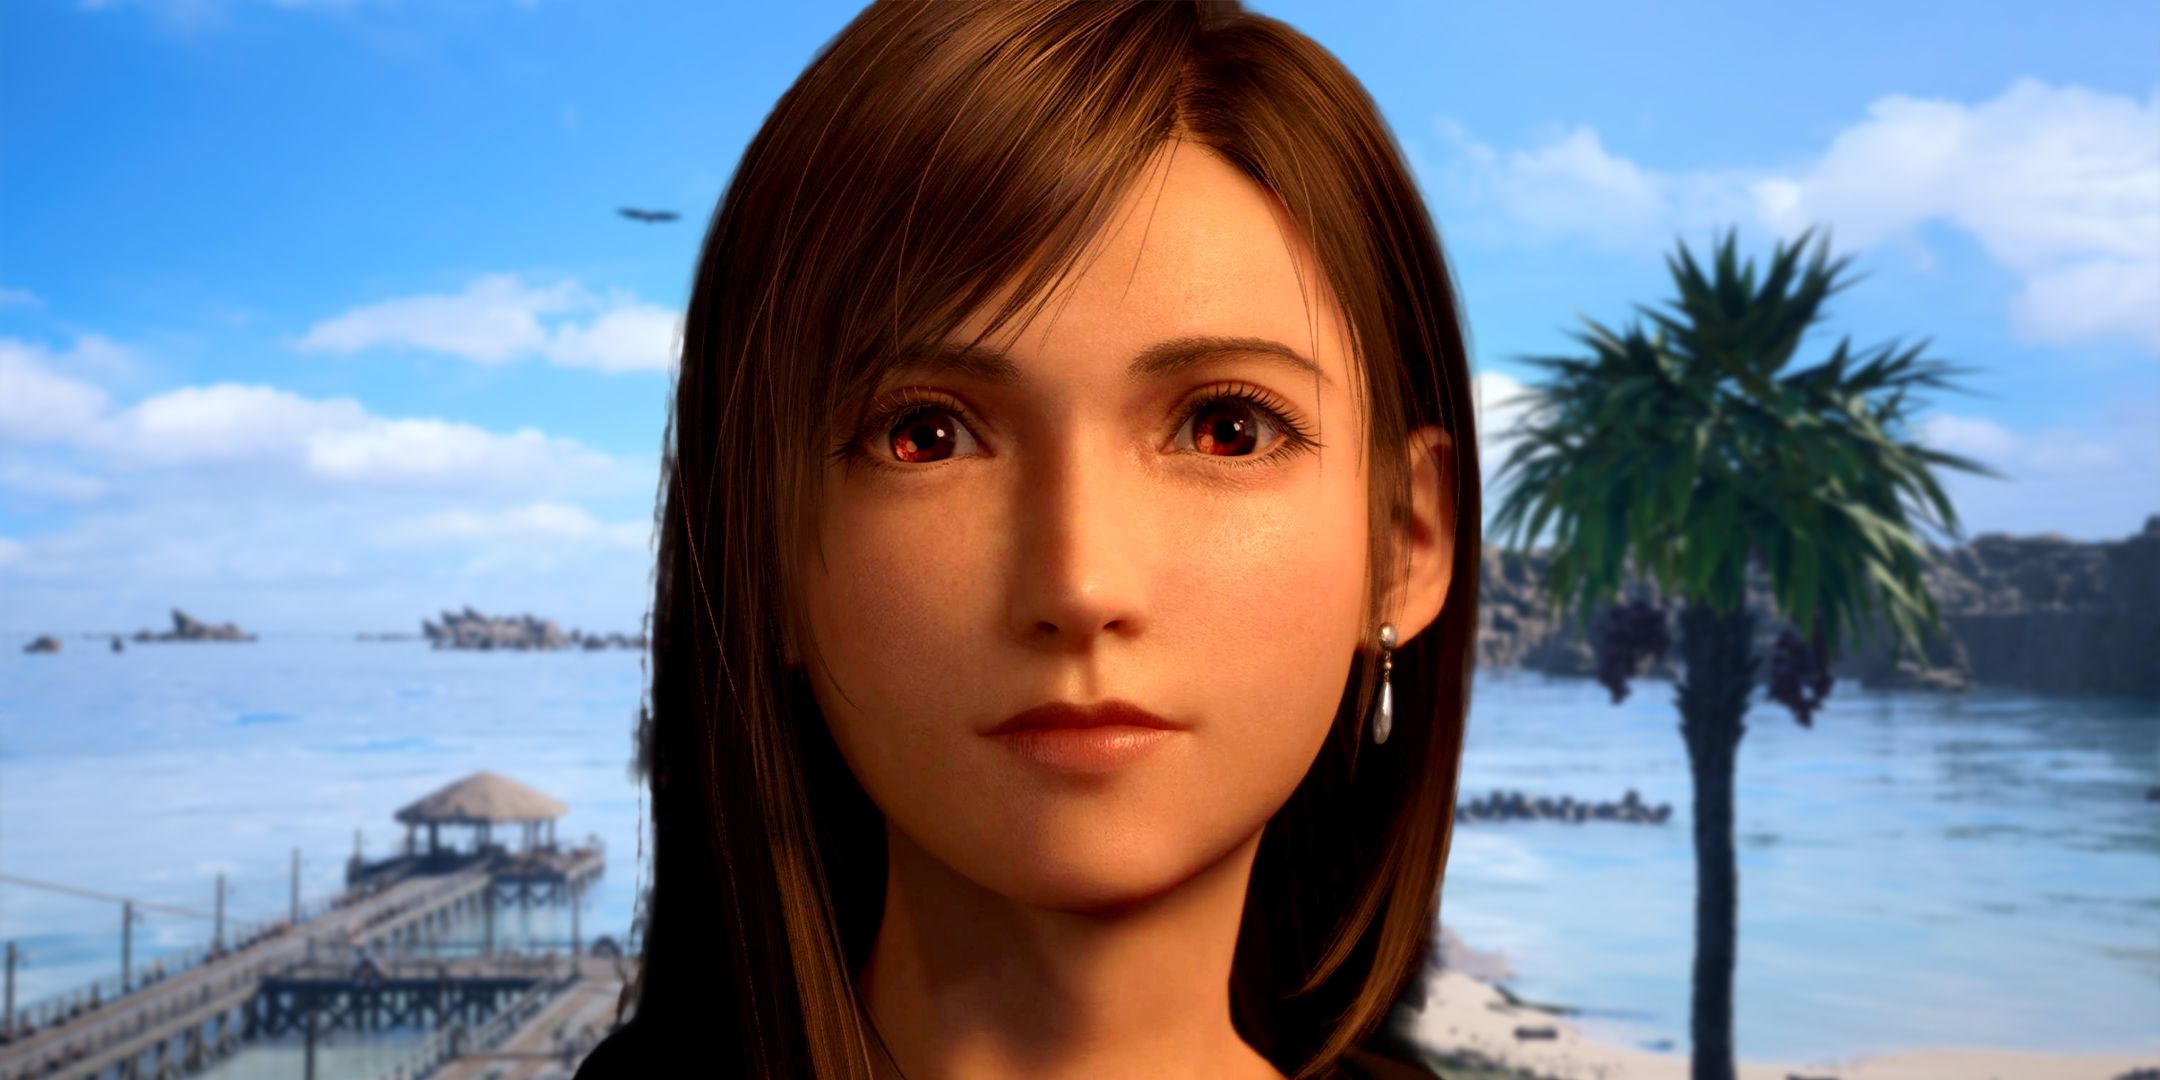 Tifa looking hopeful in Final Fantasy 7 Rebirth in front of the Costa del Sol beachfront scenery.